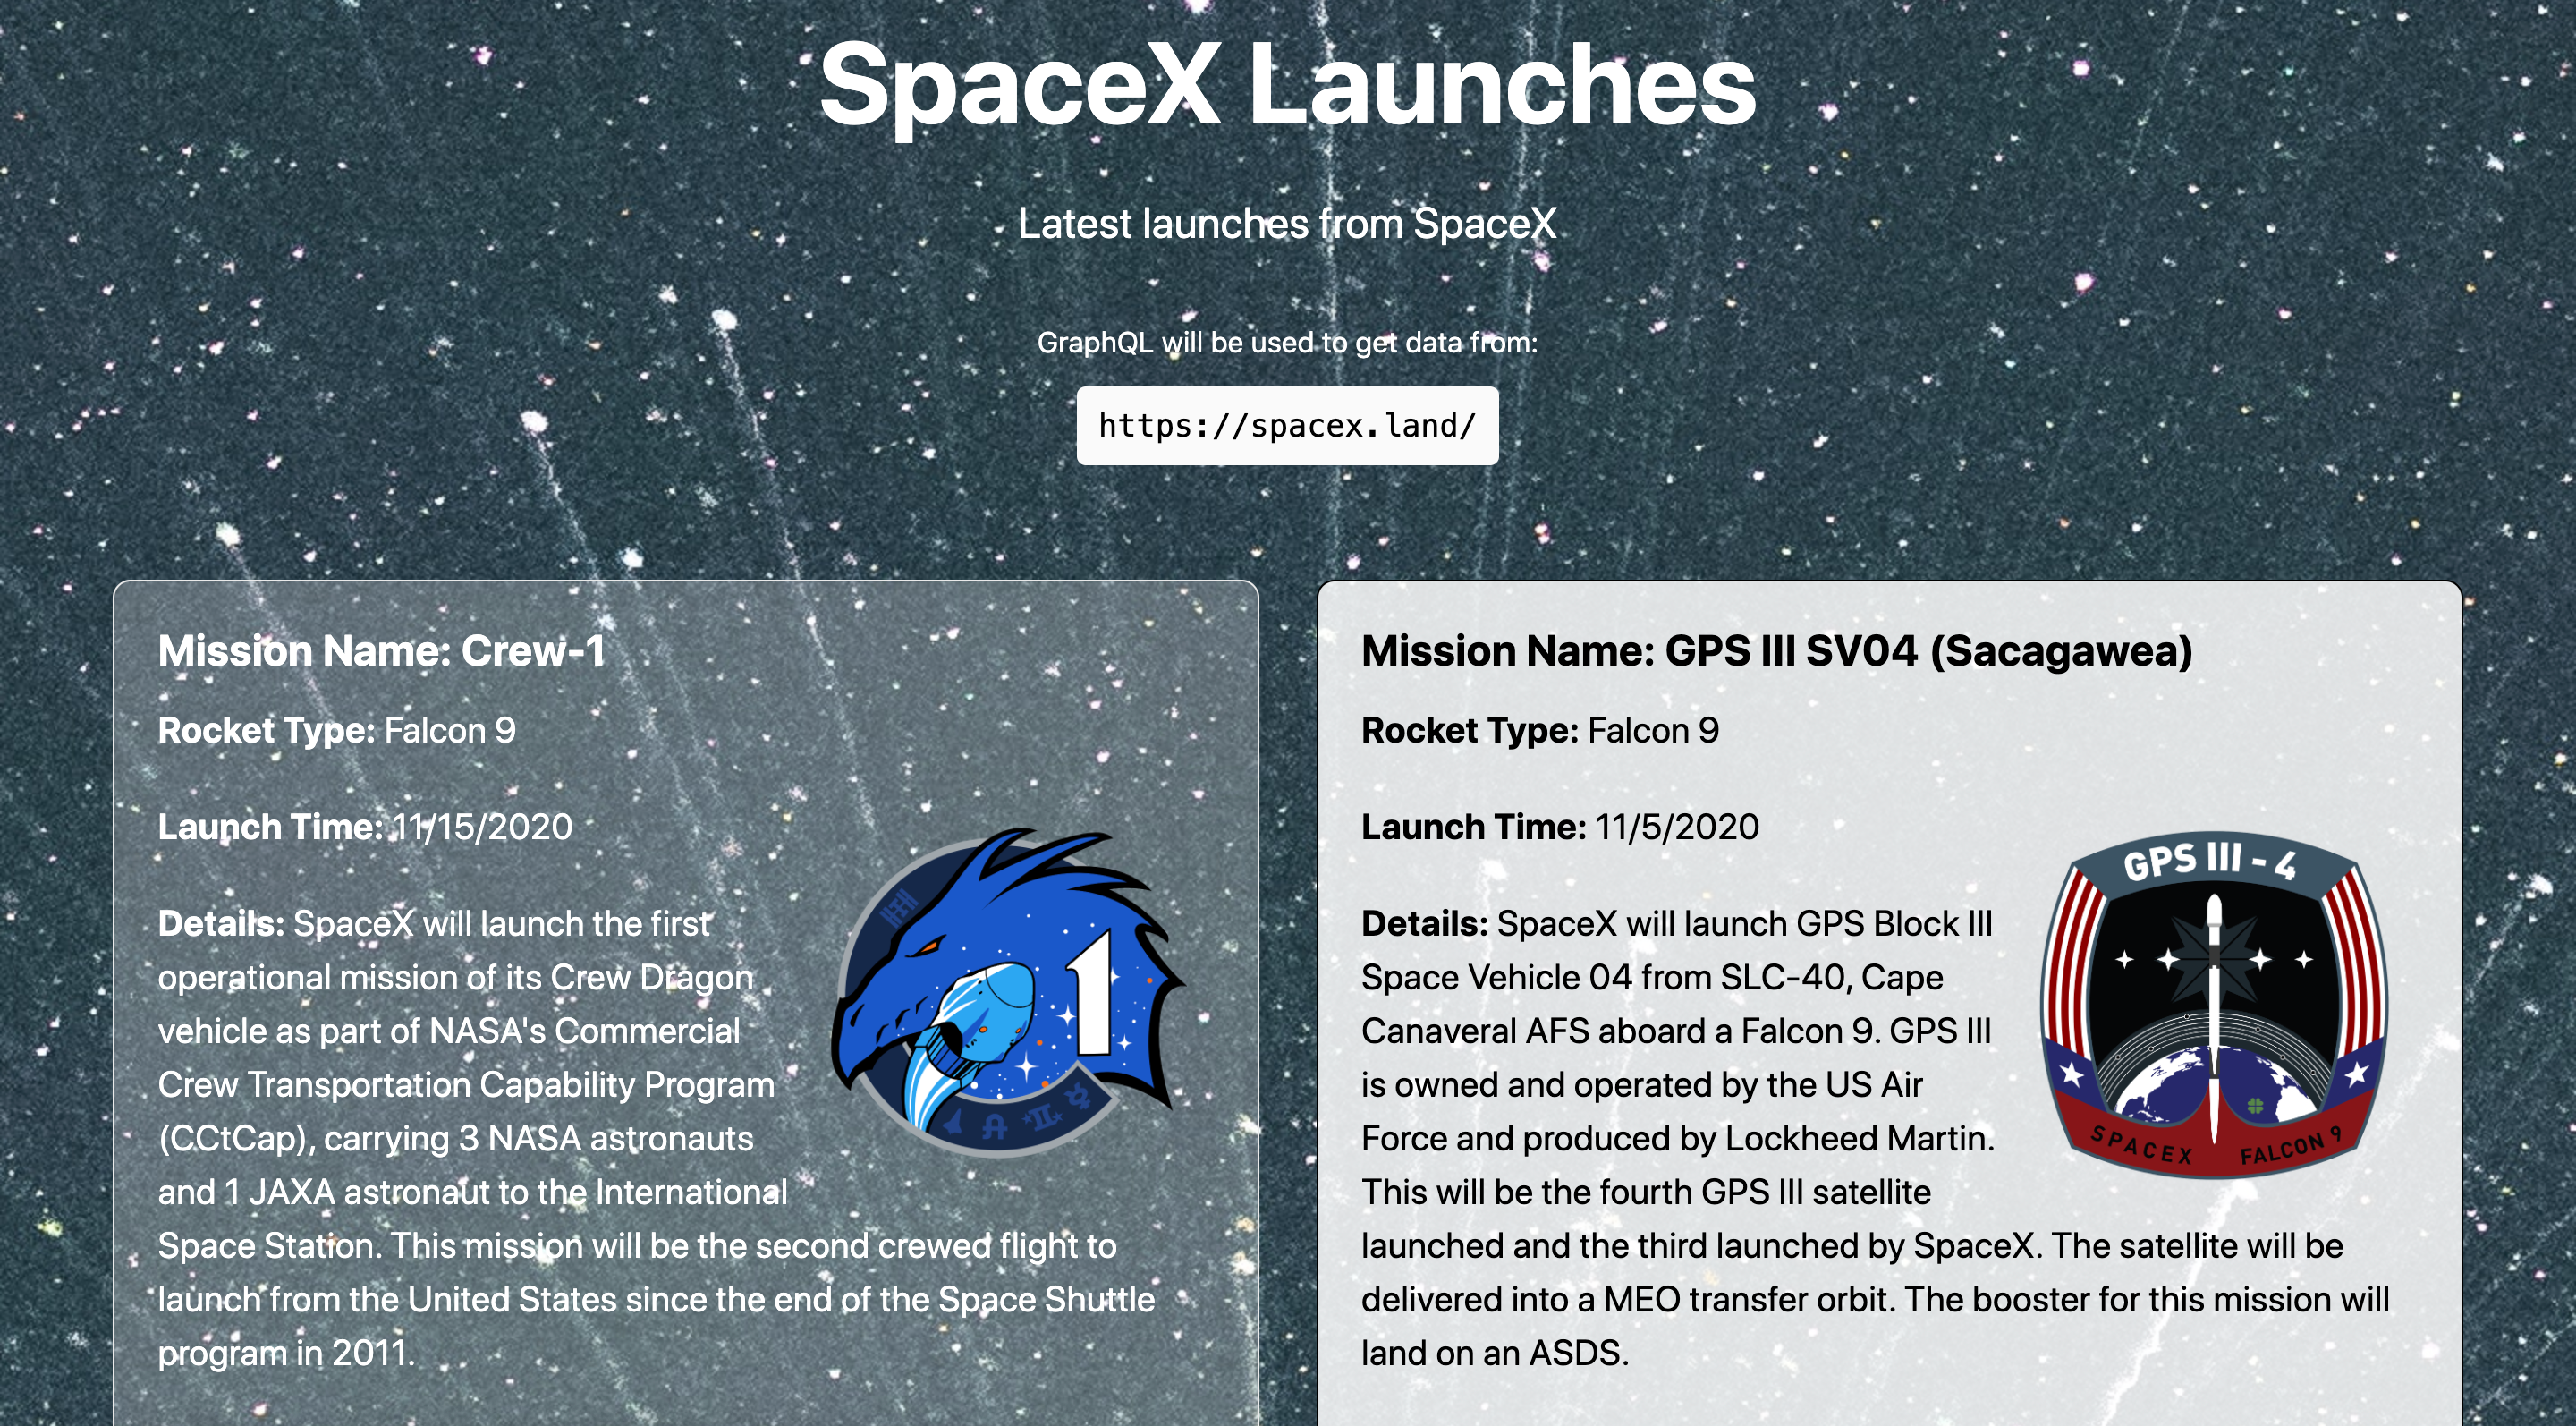 Image of SpaceX Launches app